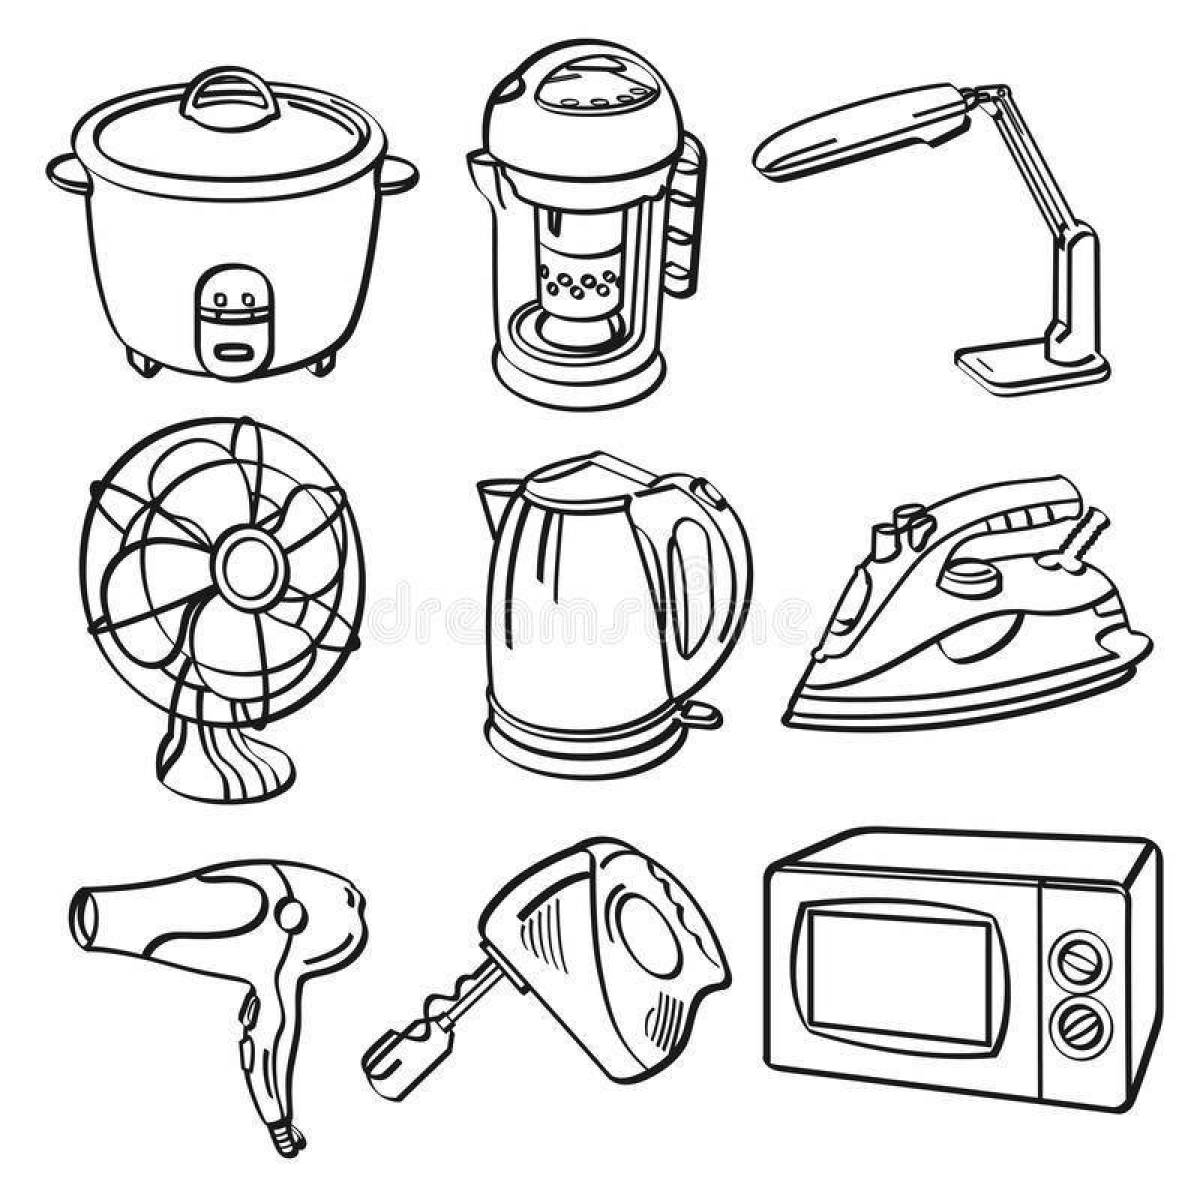 Fun coloring of household items